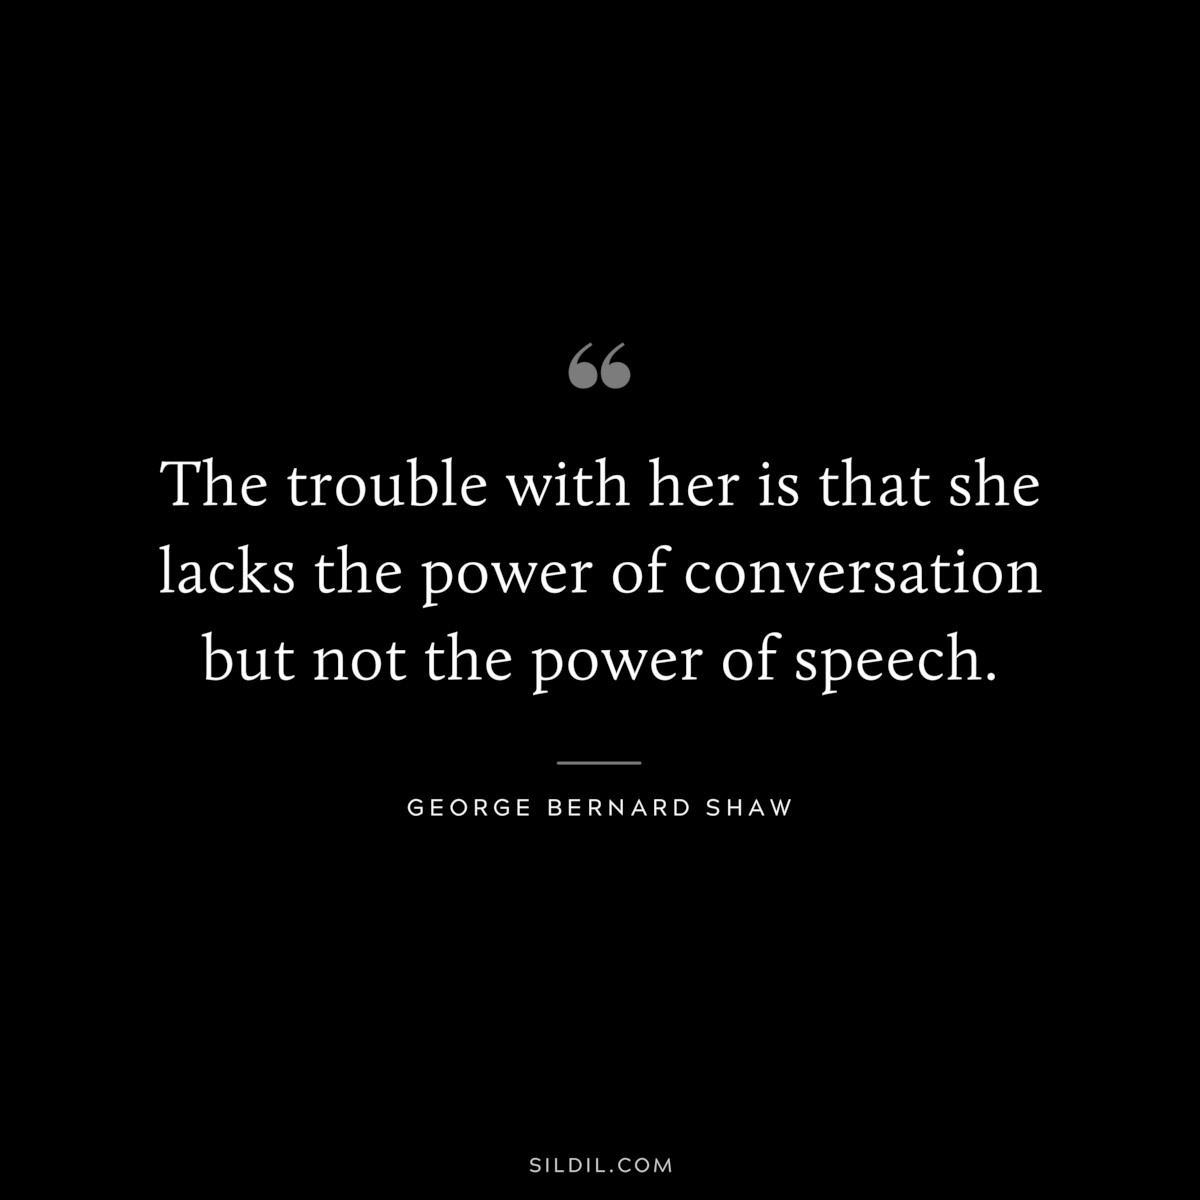 The trouble with her is that she lacks the power of conversation but not the power of speech. ― George Bernard Shaw